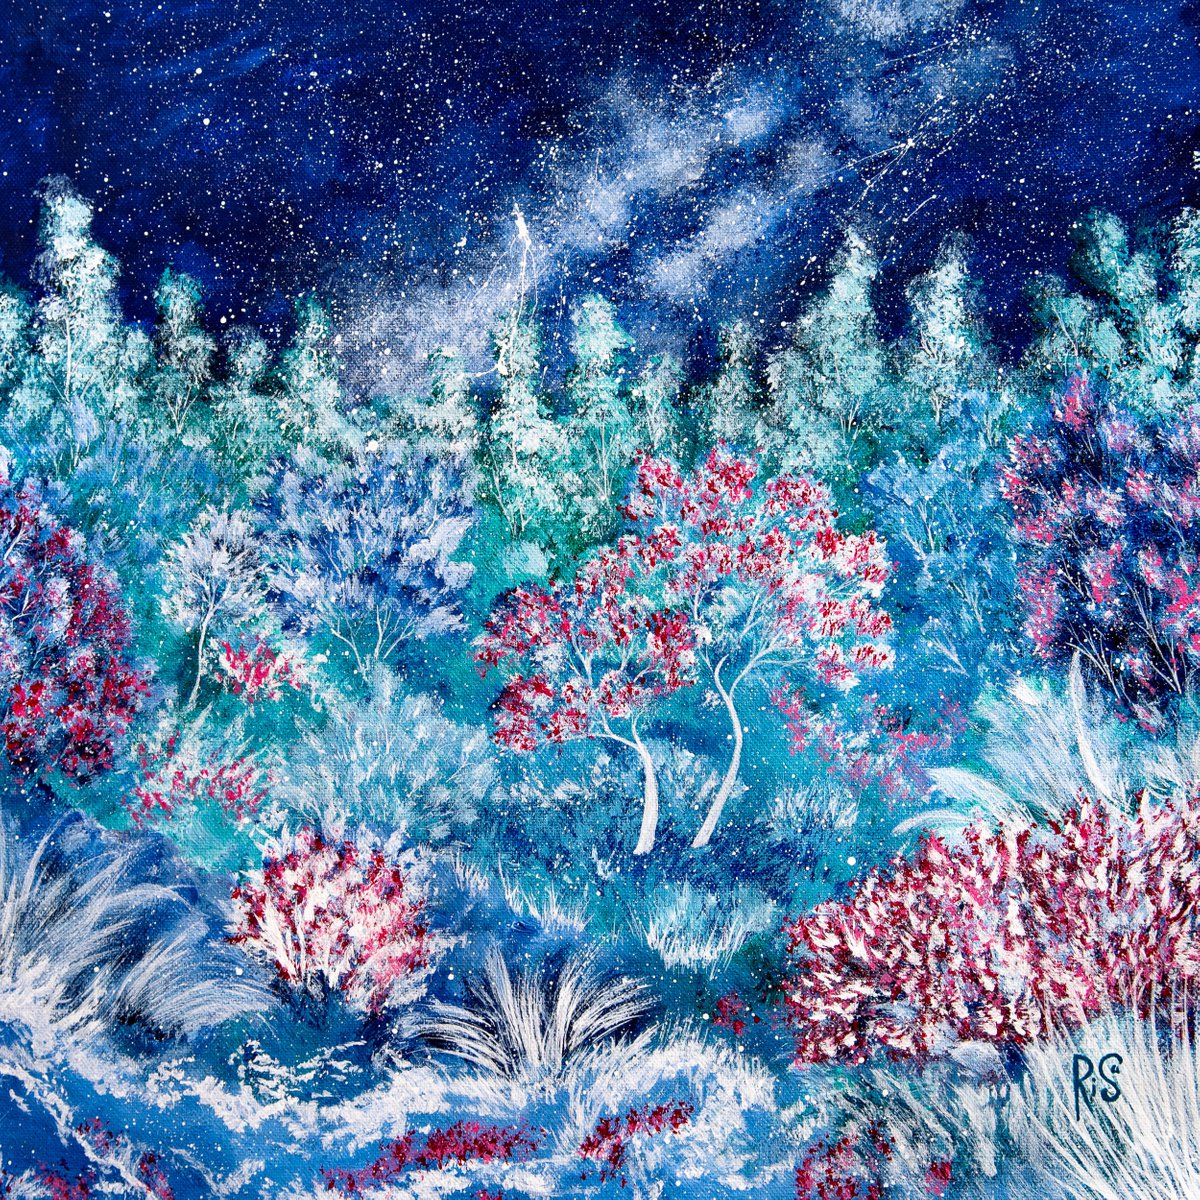 UNDER THE SEA - 40x40 cm, abstract garden, flowering bushes, blooming trees, night scene by Rimma Savina